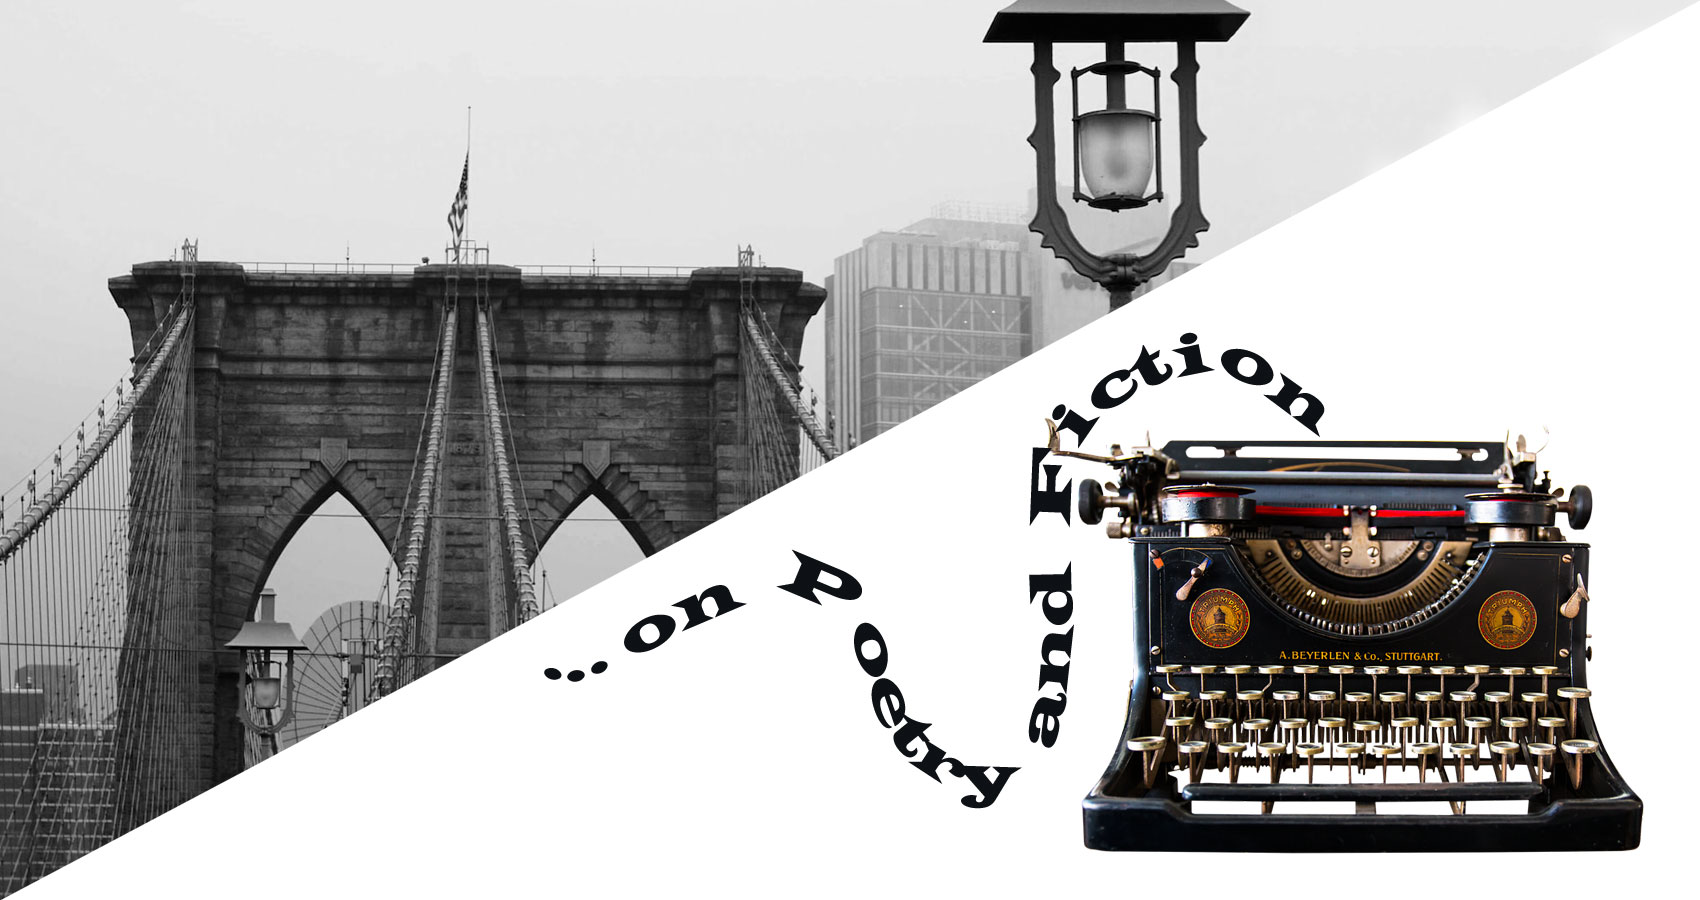 ...On Poetry and Fiction - Just “One Word” Away ("Brooklyn"), editorial by Phyllis P. Colucci at Spillwords.com